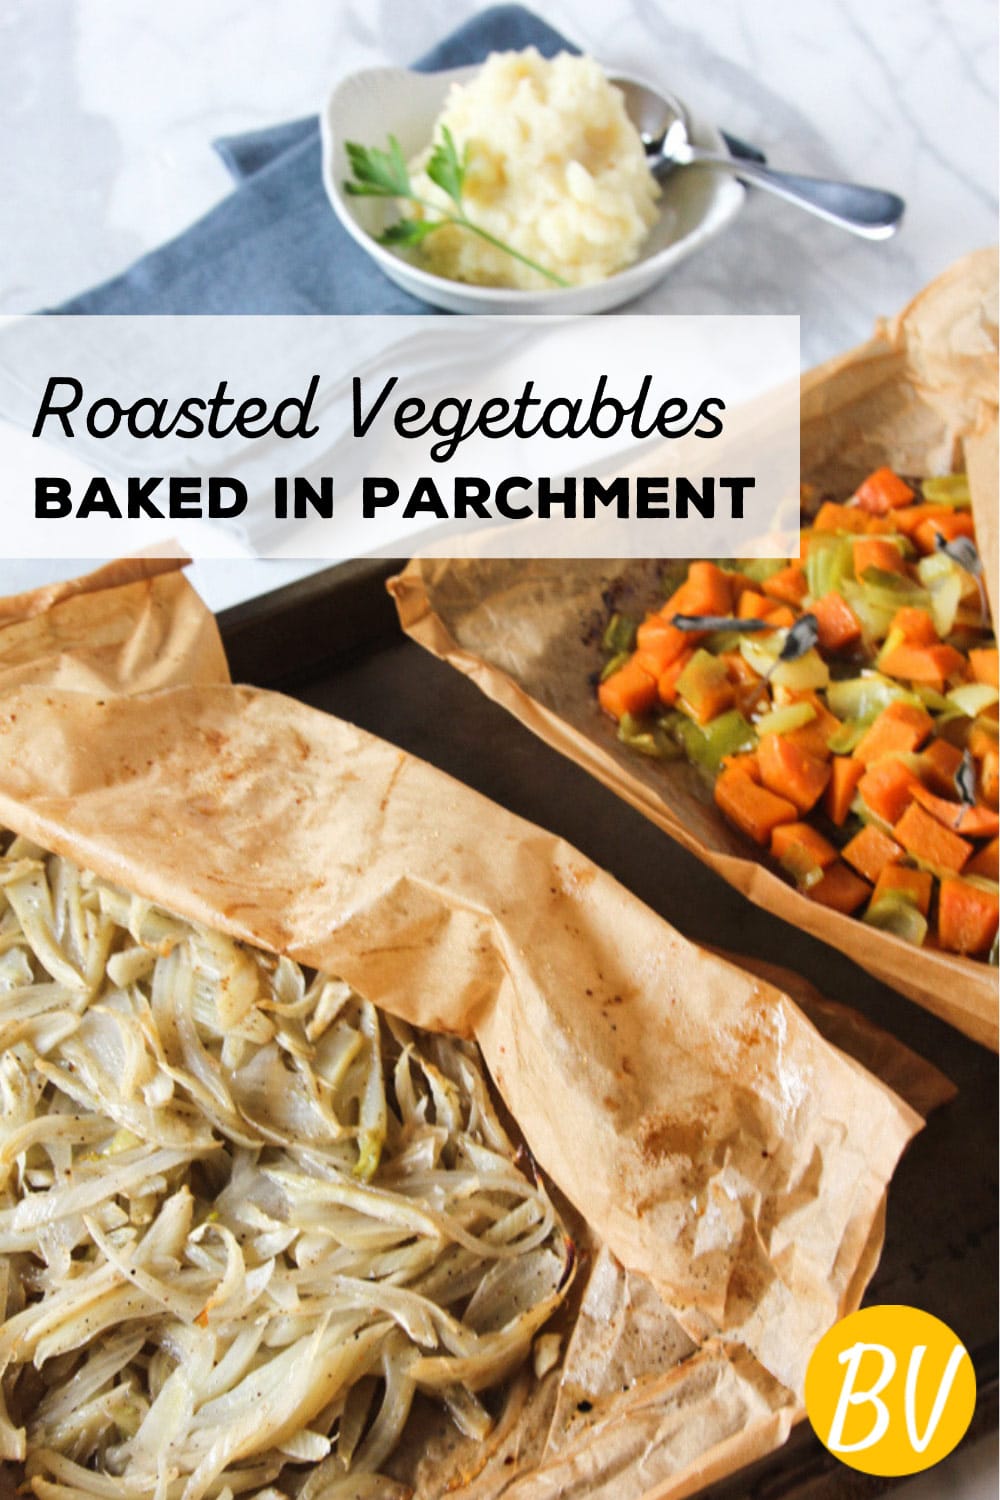 Roasted Vegetables Baked In Parchment (Fennel & Onion)